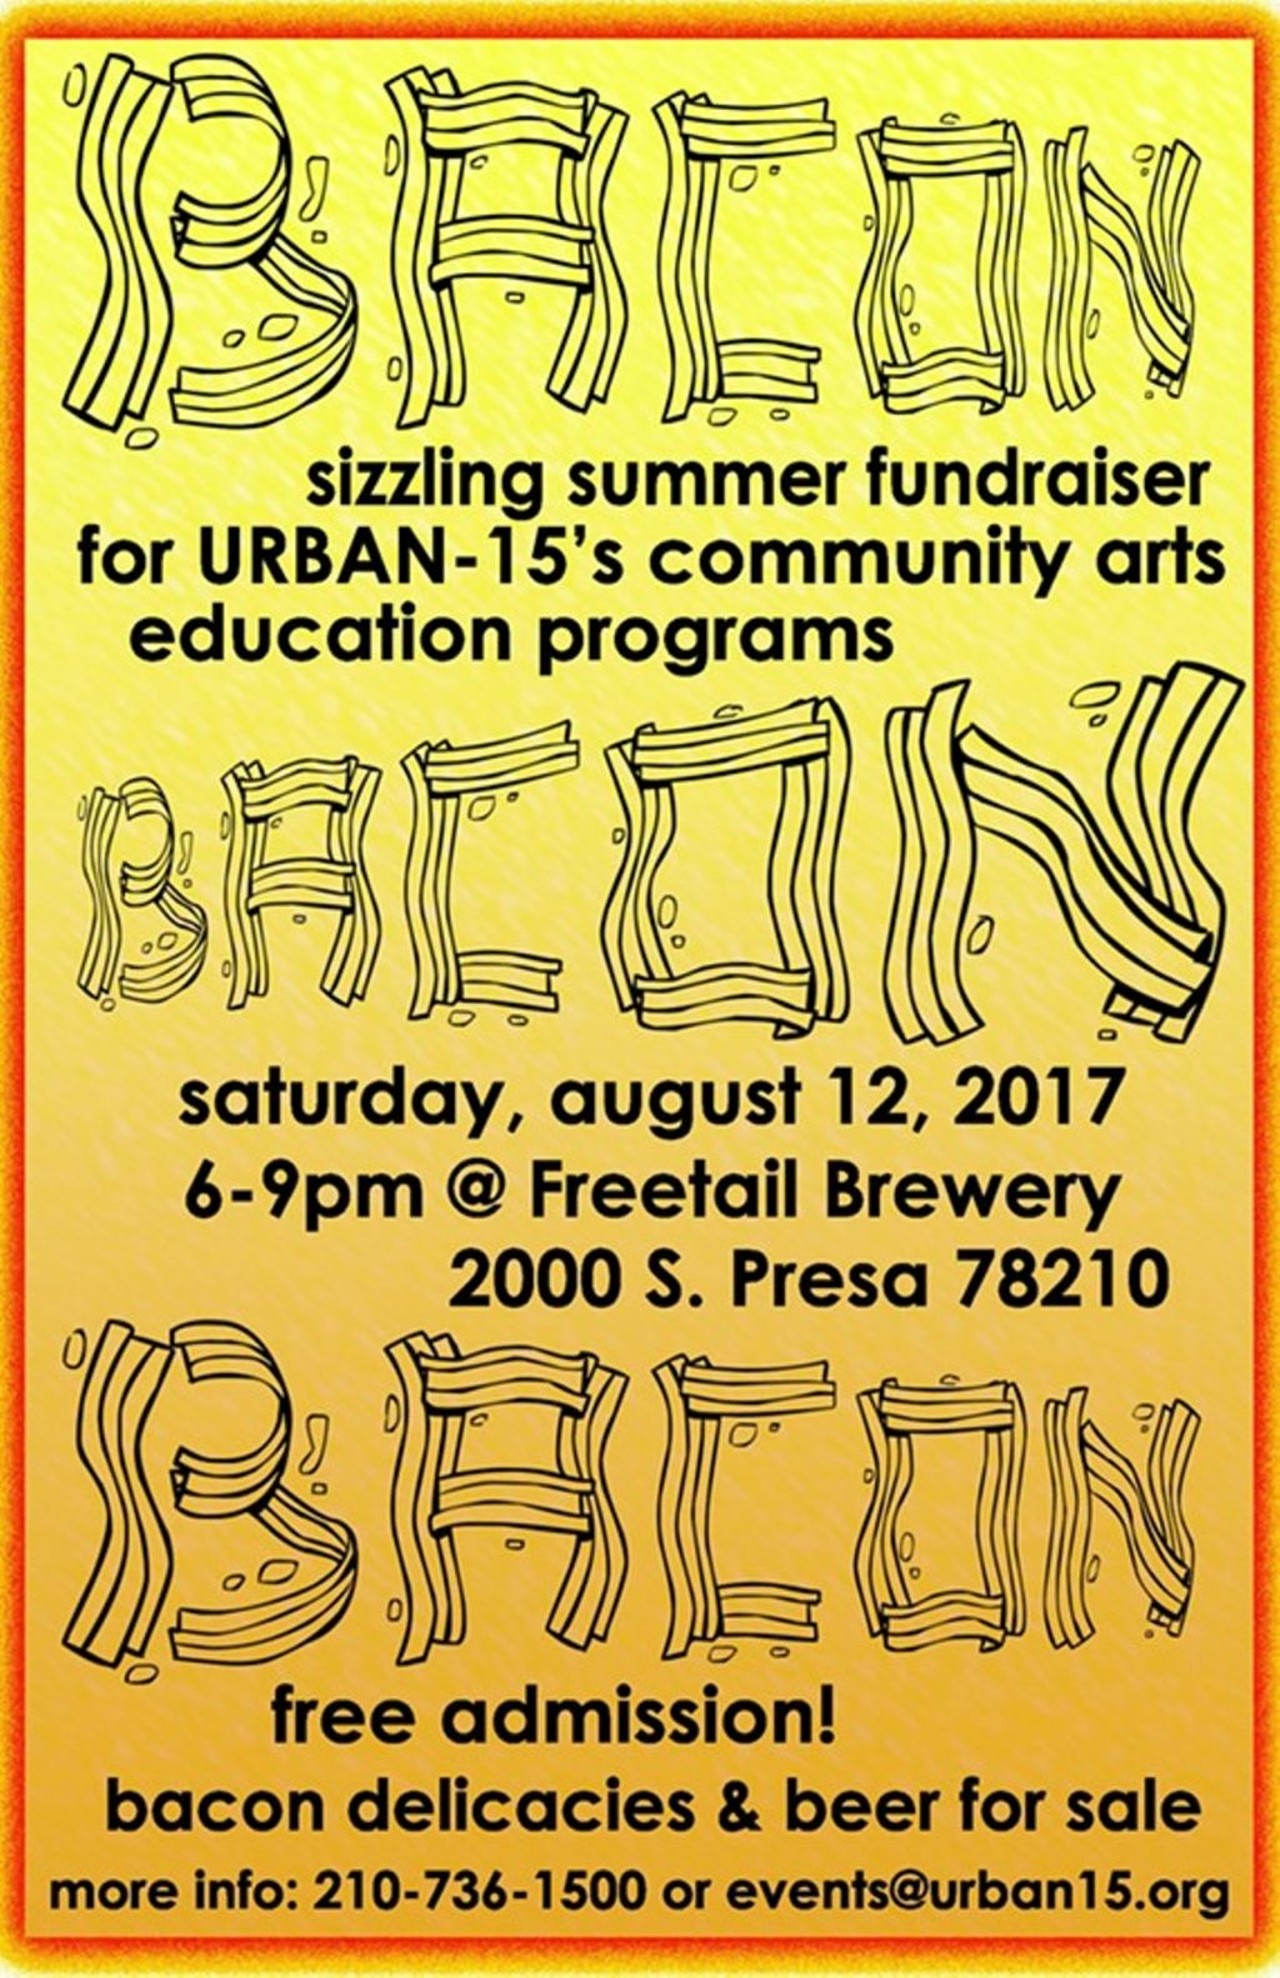 Bacon Bacon Bacon: A Fundraiser 
Sat., Aug. 12, 6-9 p.m., Freetail Brewing Co. Tasting Room, 2000 S. Presa St.